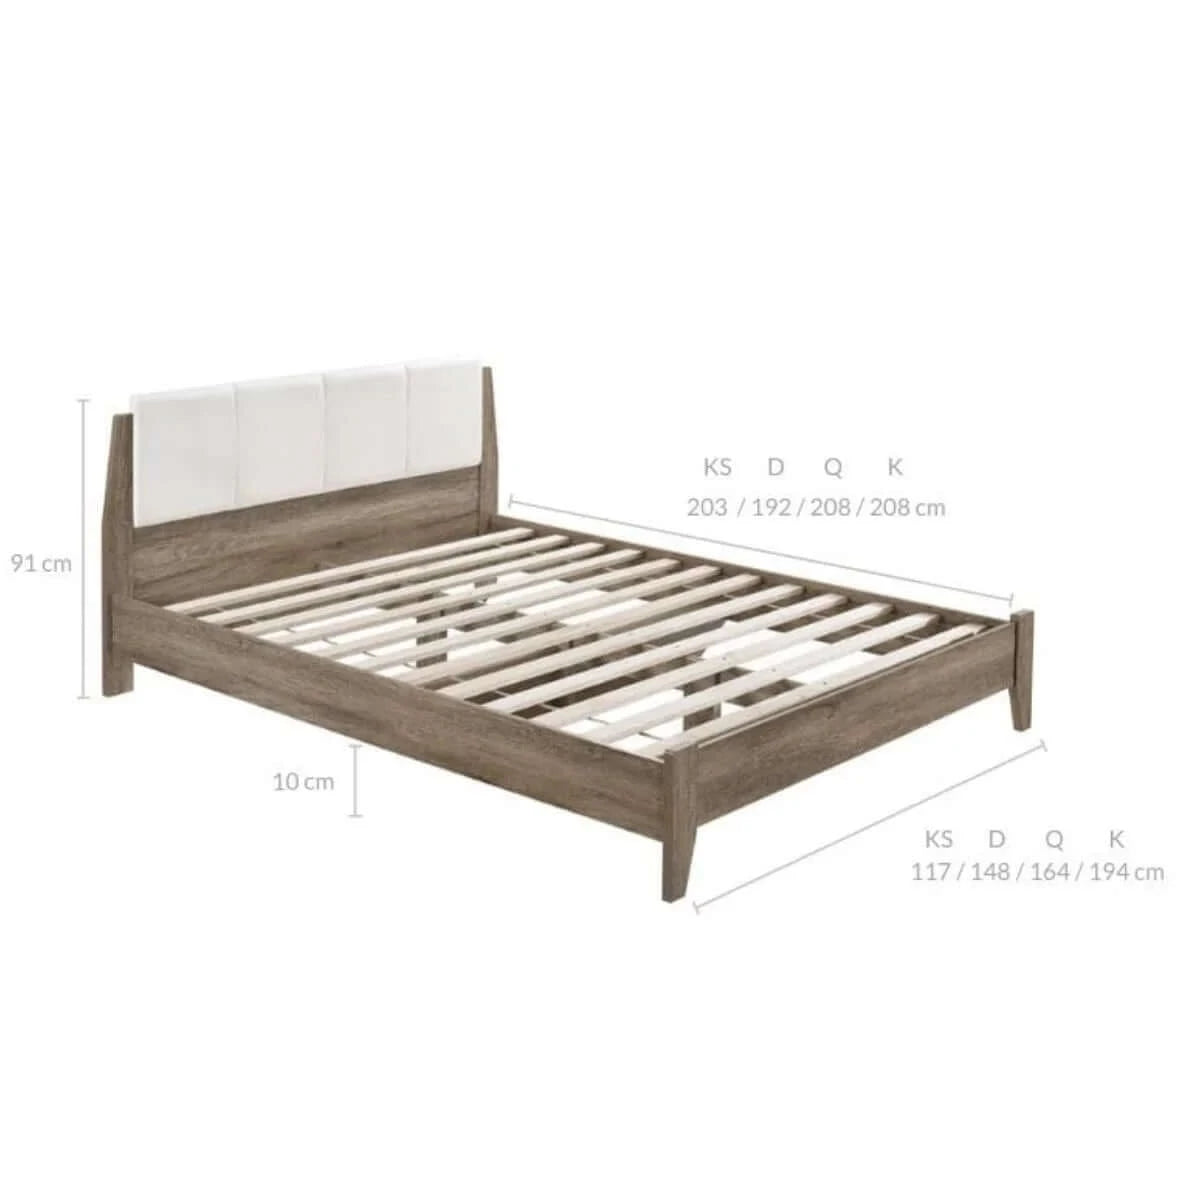 Buy wooden bed frame w leather upholstered bed head queen - upinteriors-Upinteriors